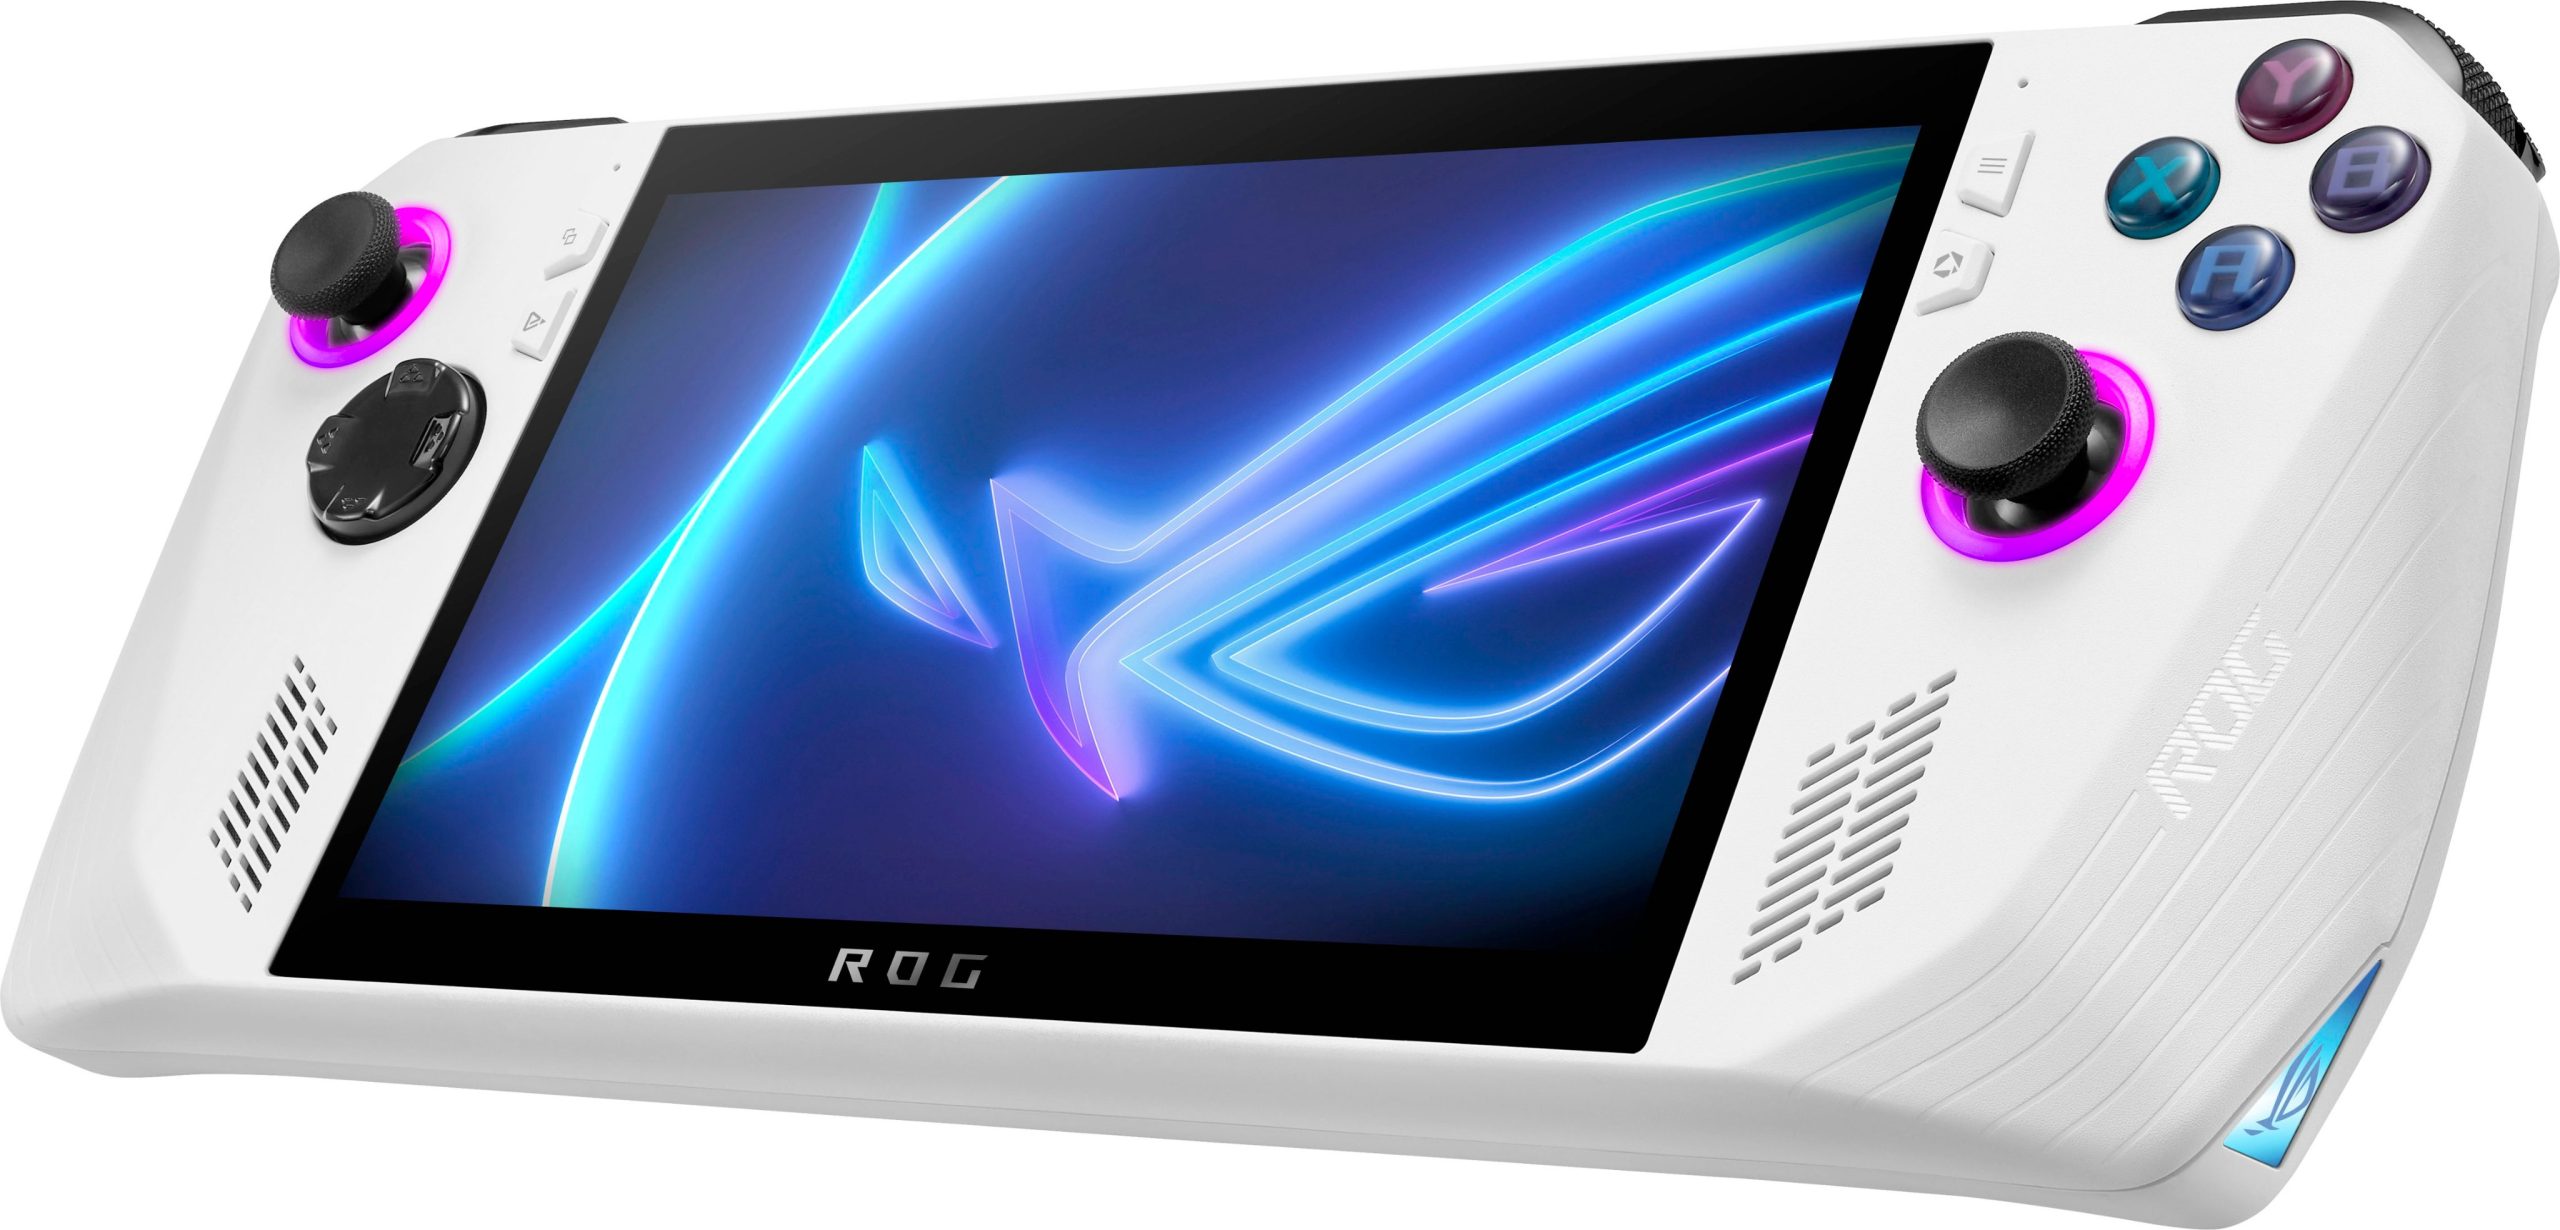 10 standout features of the ROG Ally that surpass ordinary